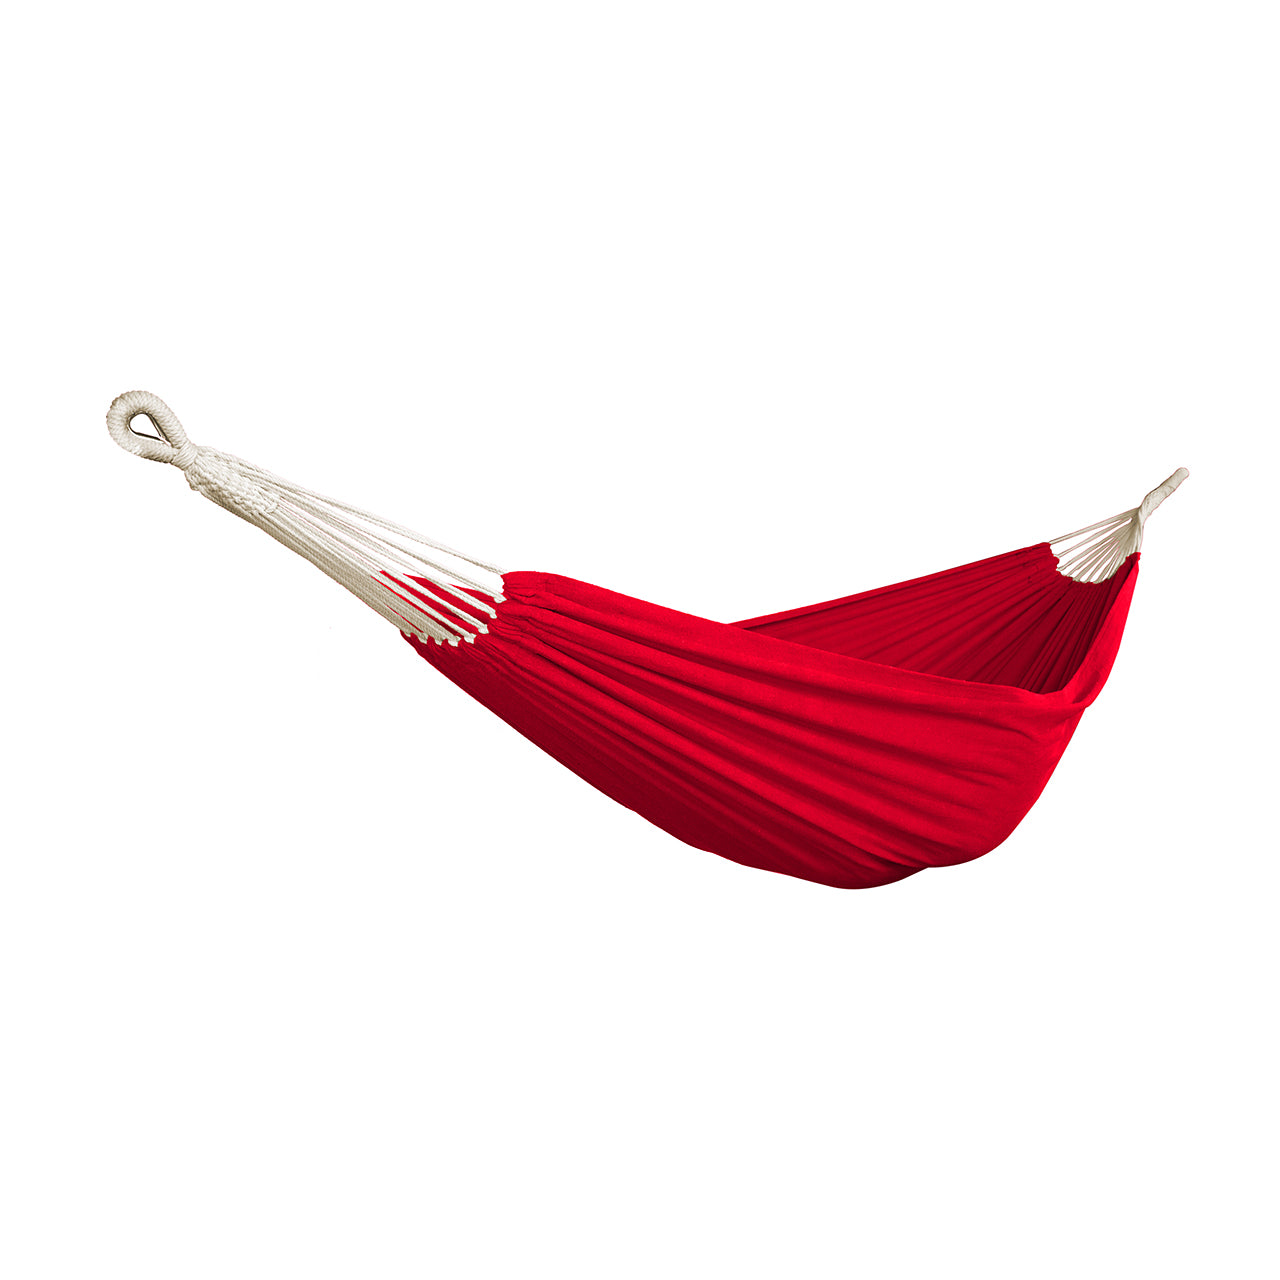 Bliss Hammocks 60-inch Wide Double Hammock in a Bag with Hand-woven Rope loops in the Red variation.